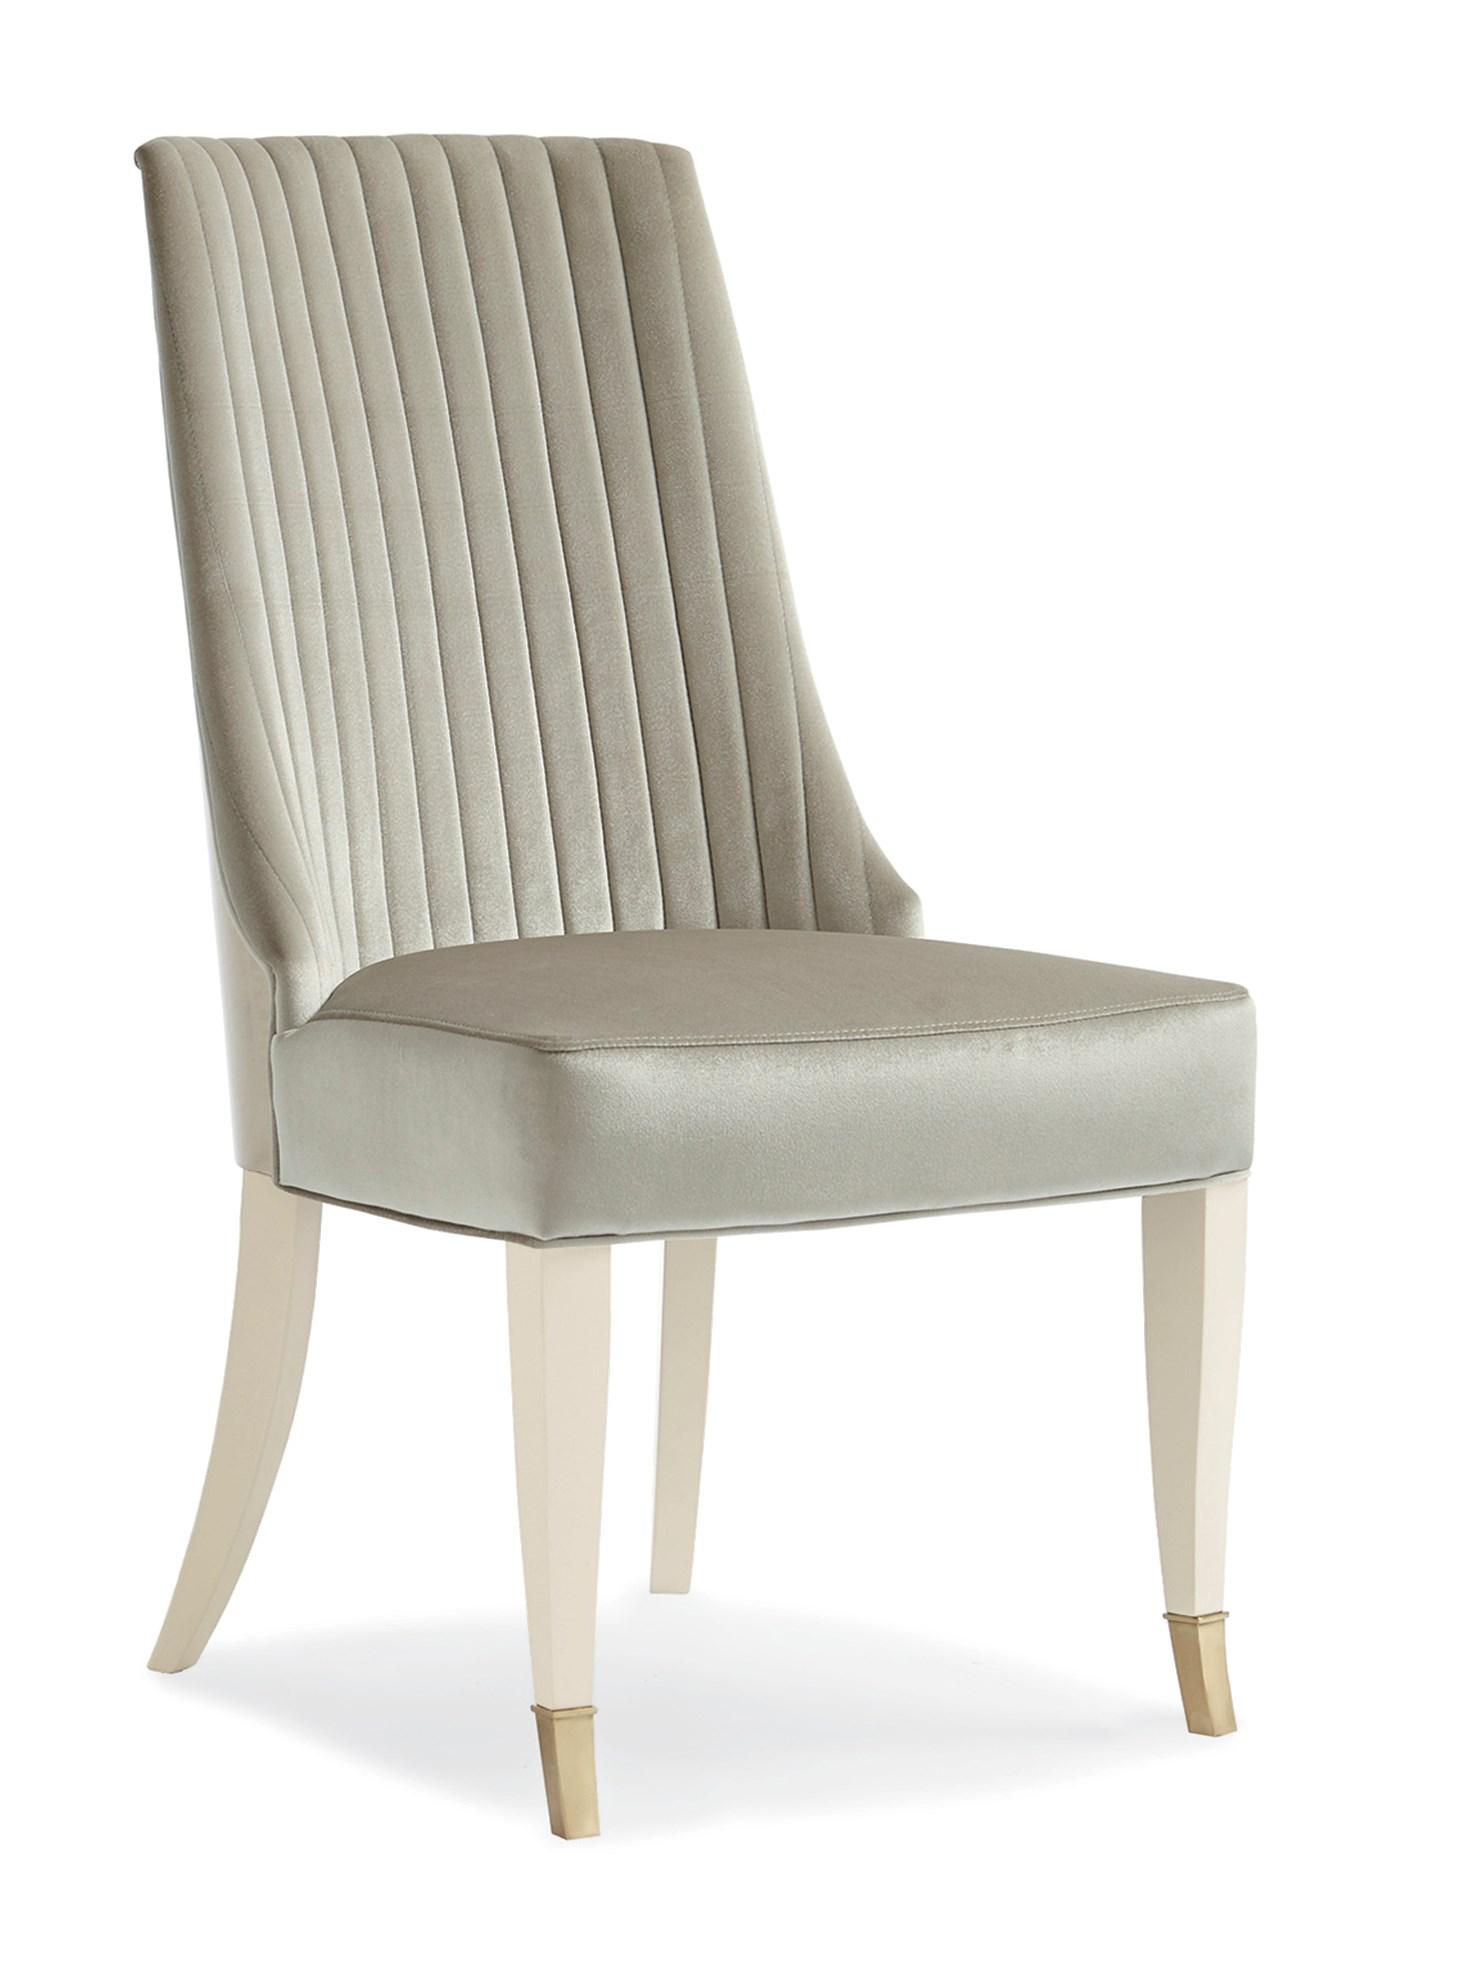 Classic Dining Chair Set LINE ME UP CLA-418-281-Set-2 in Light Gray, Champagne Fabric